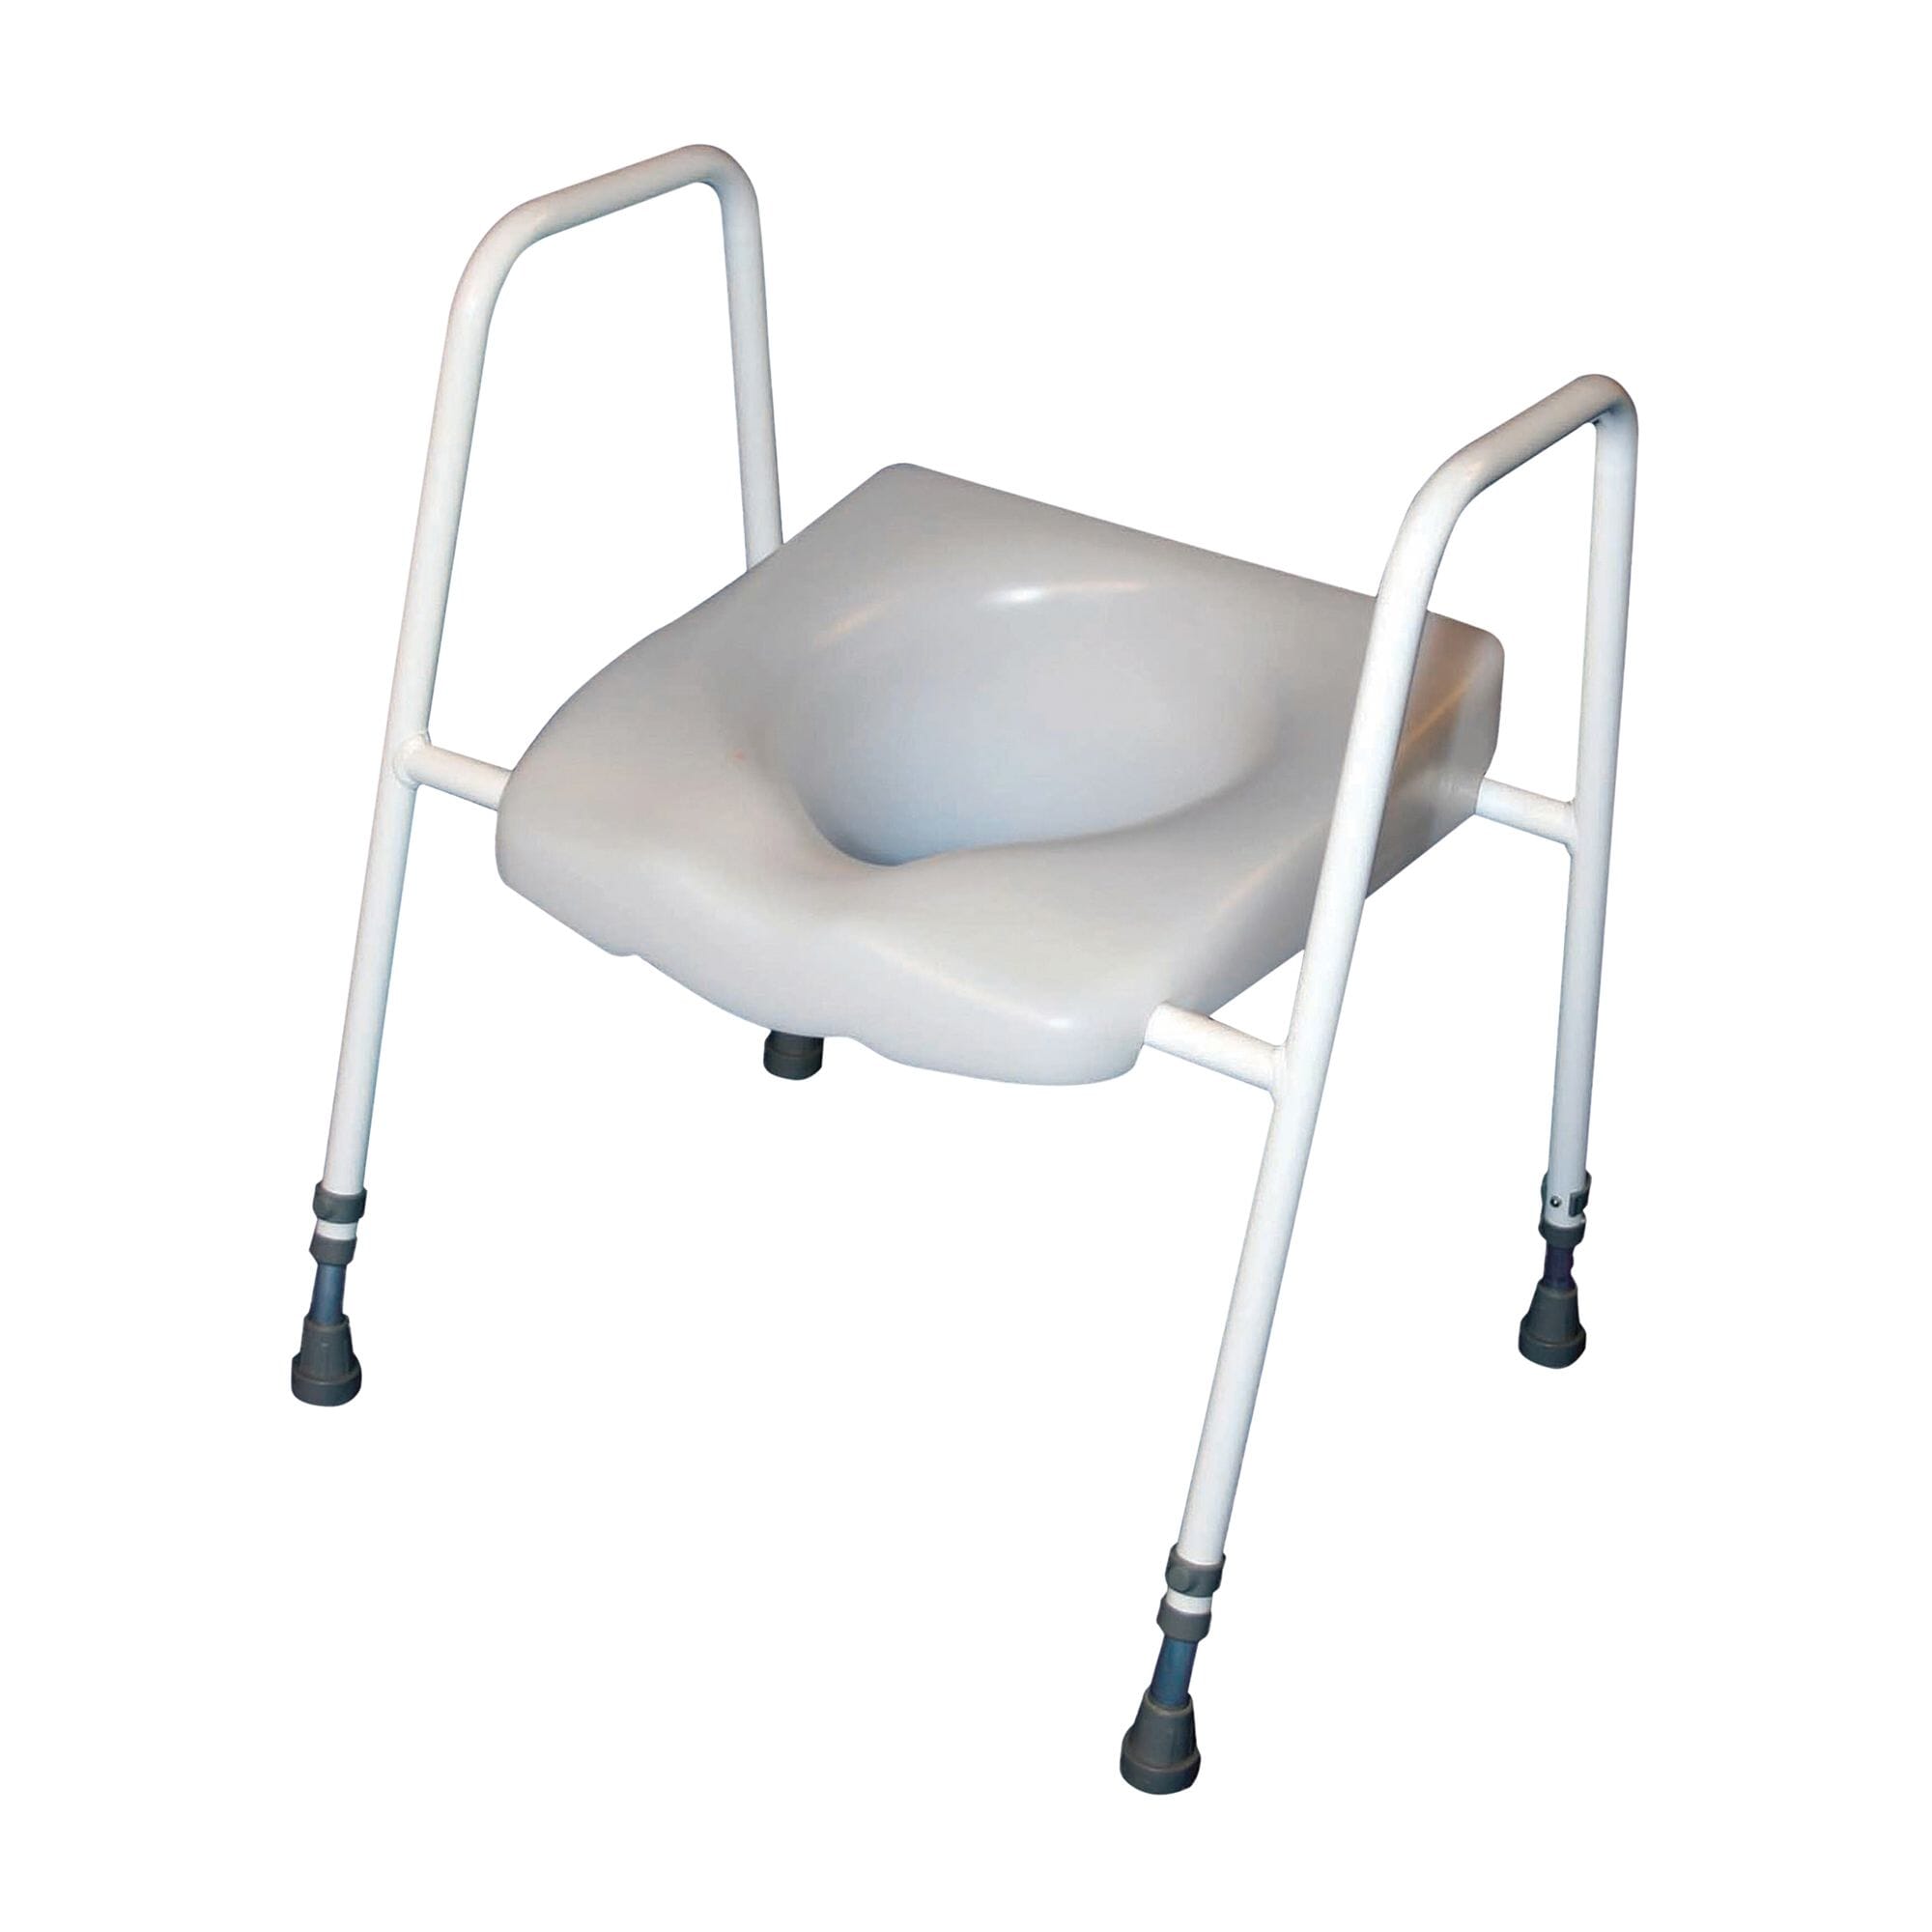 View President Raised Toilet Seat and Frame Standard Adjustable Height information